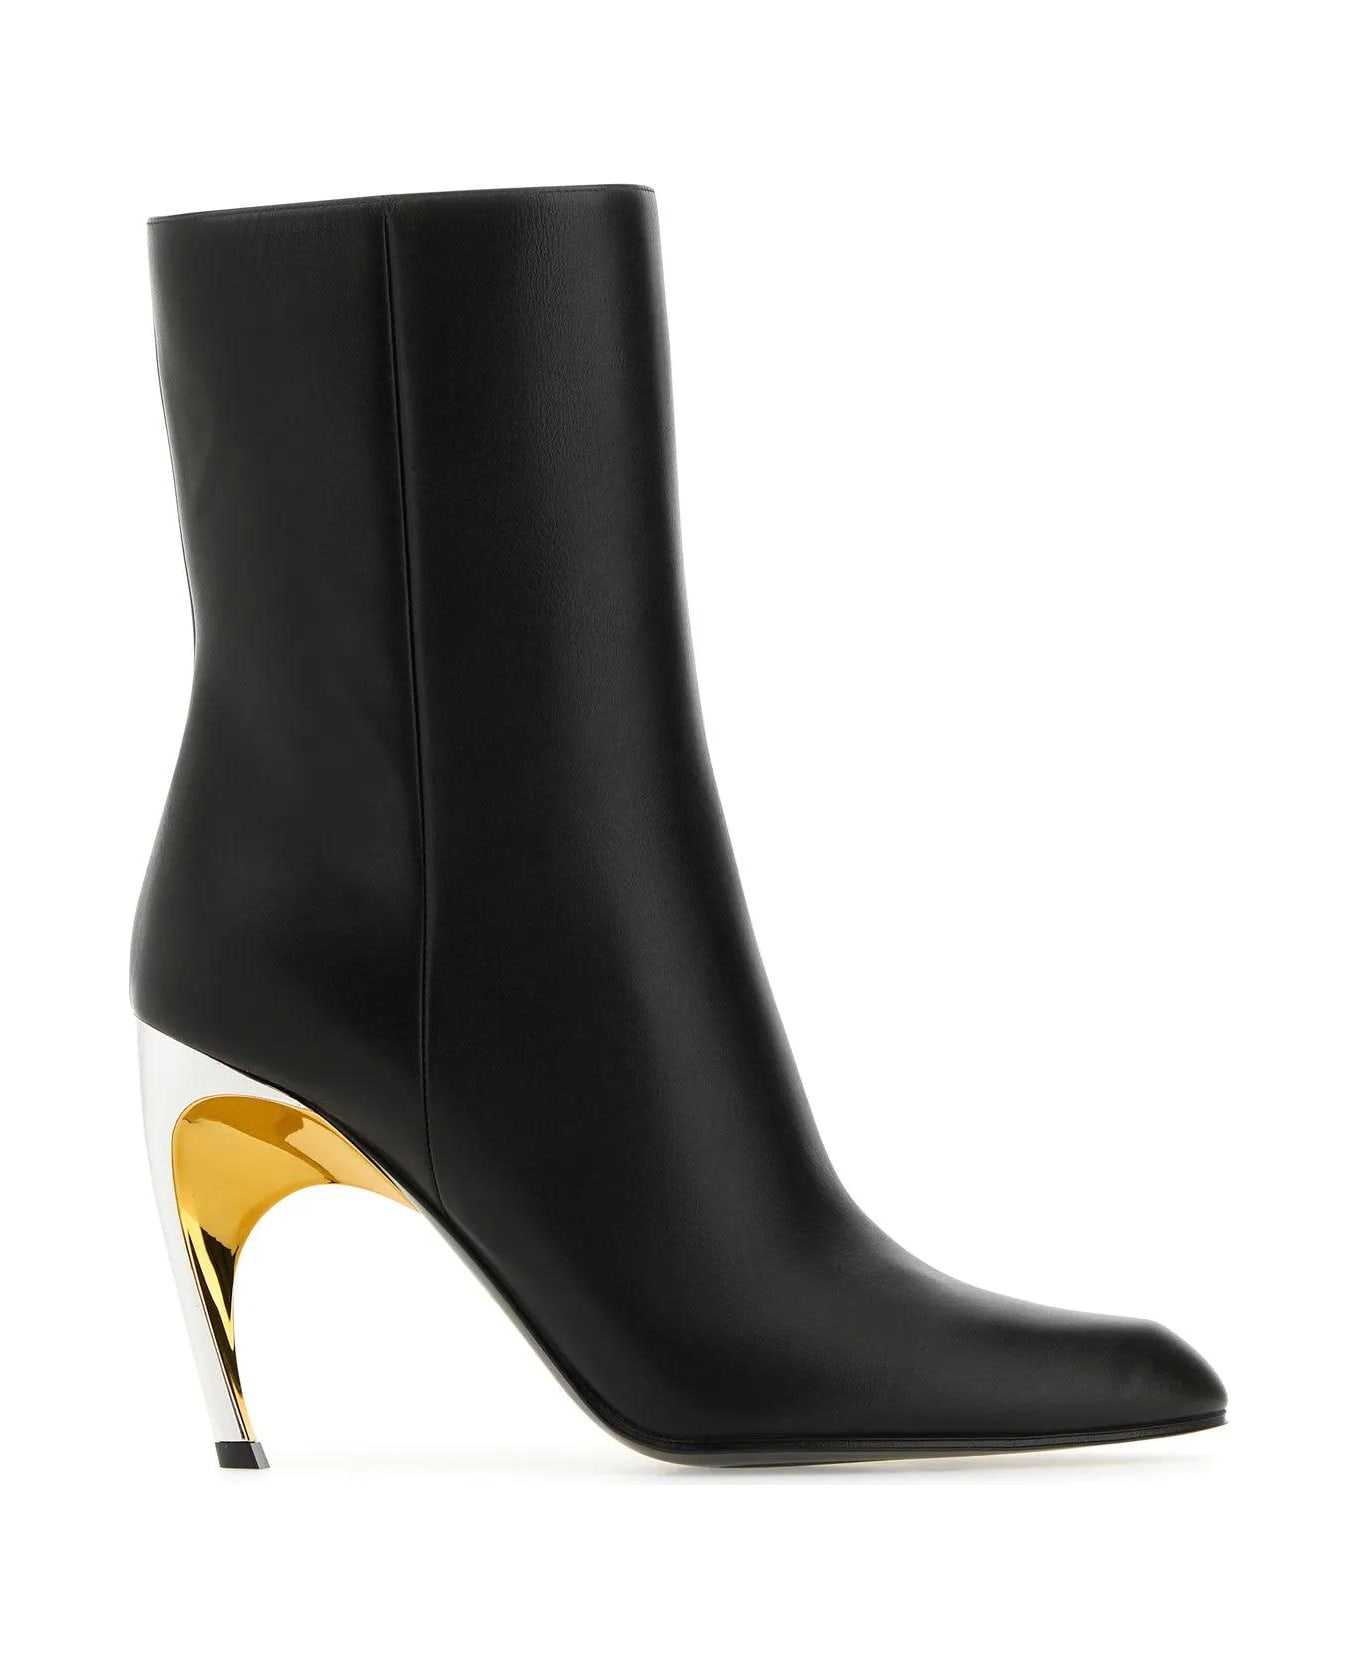 Alexander McQueen Armadillo Ankle Boots - Black/silver/gold